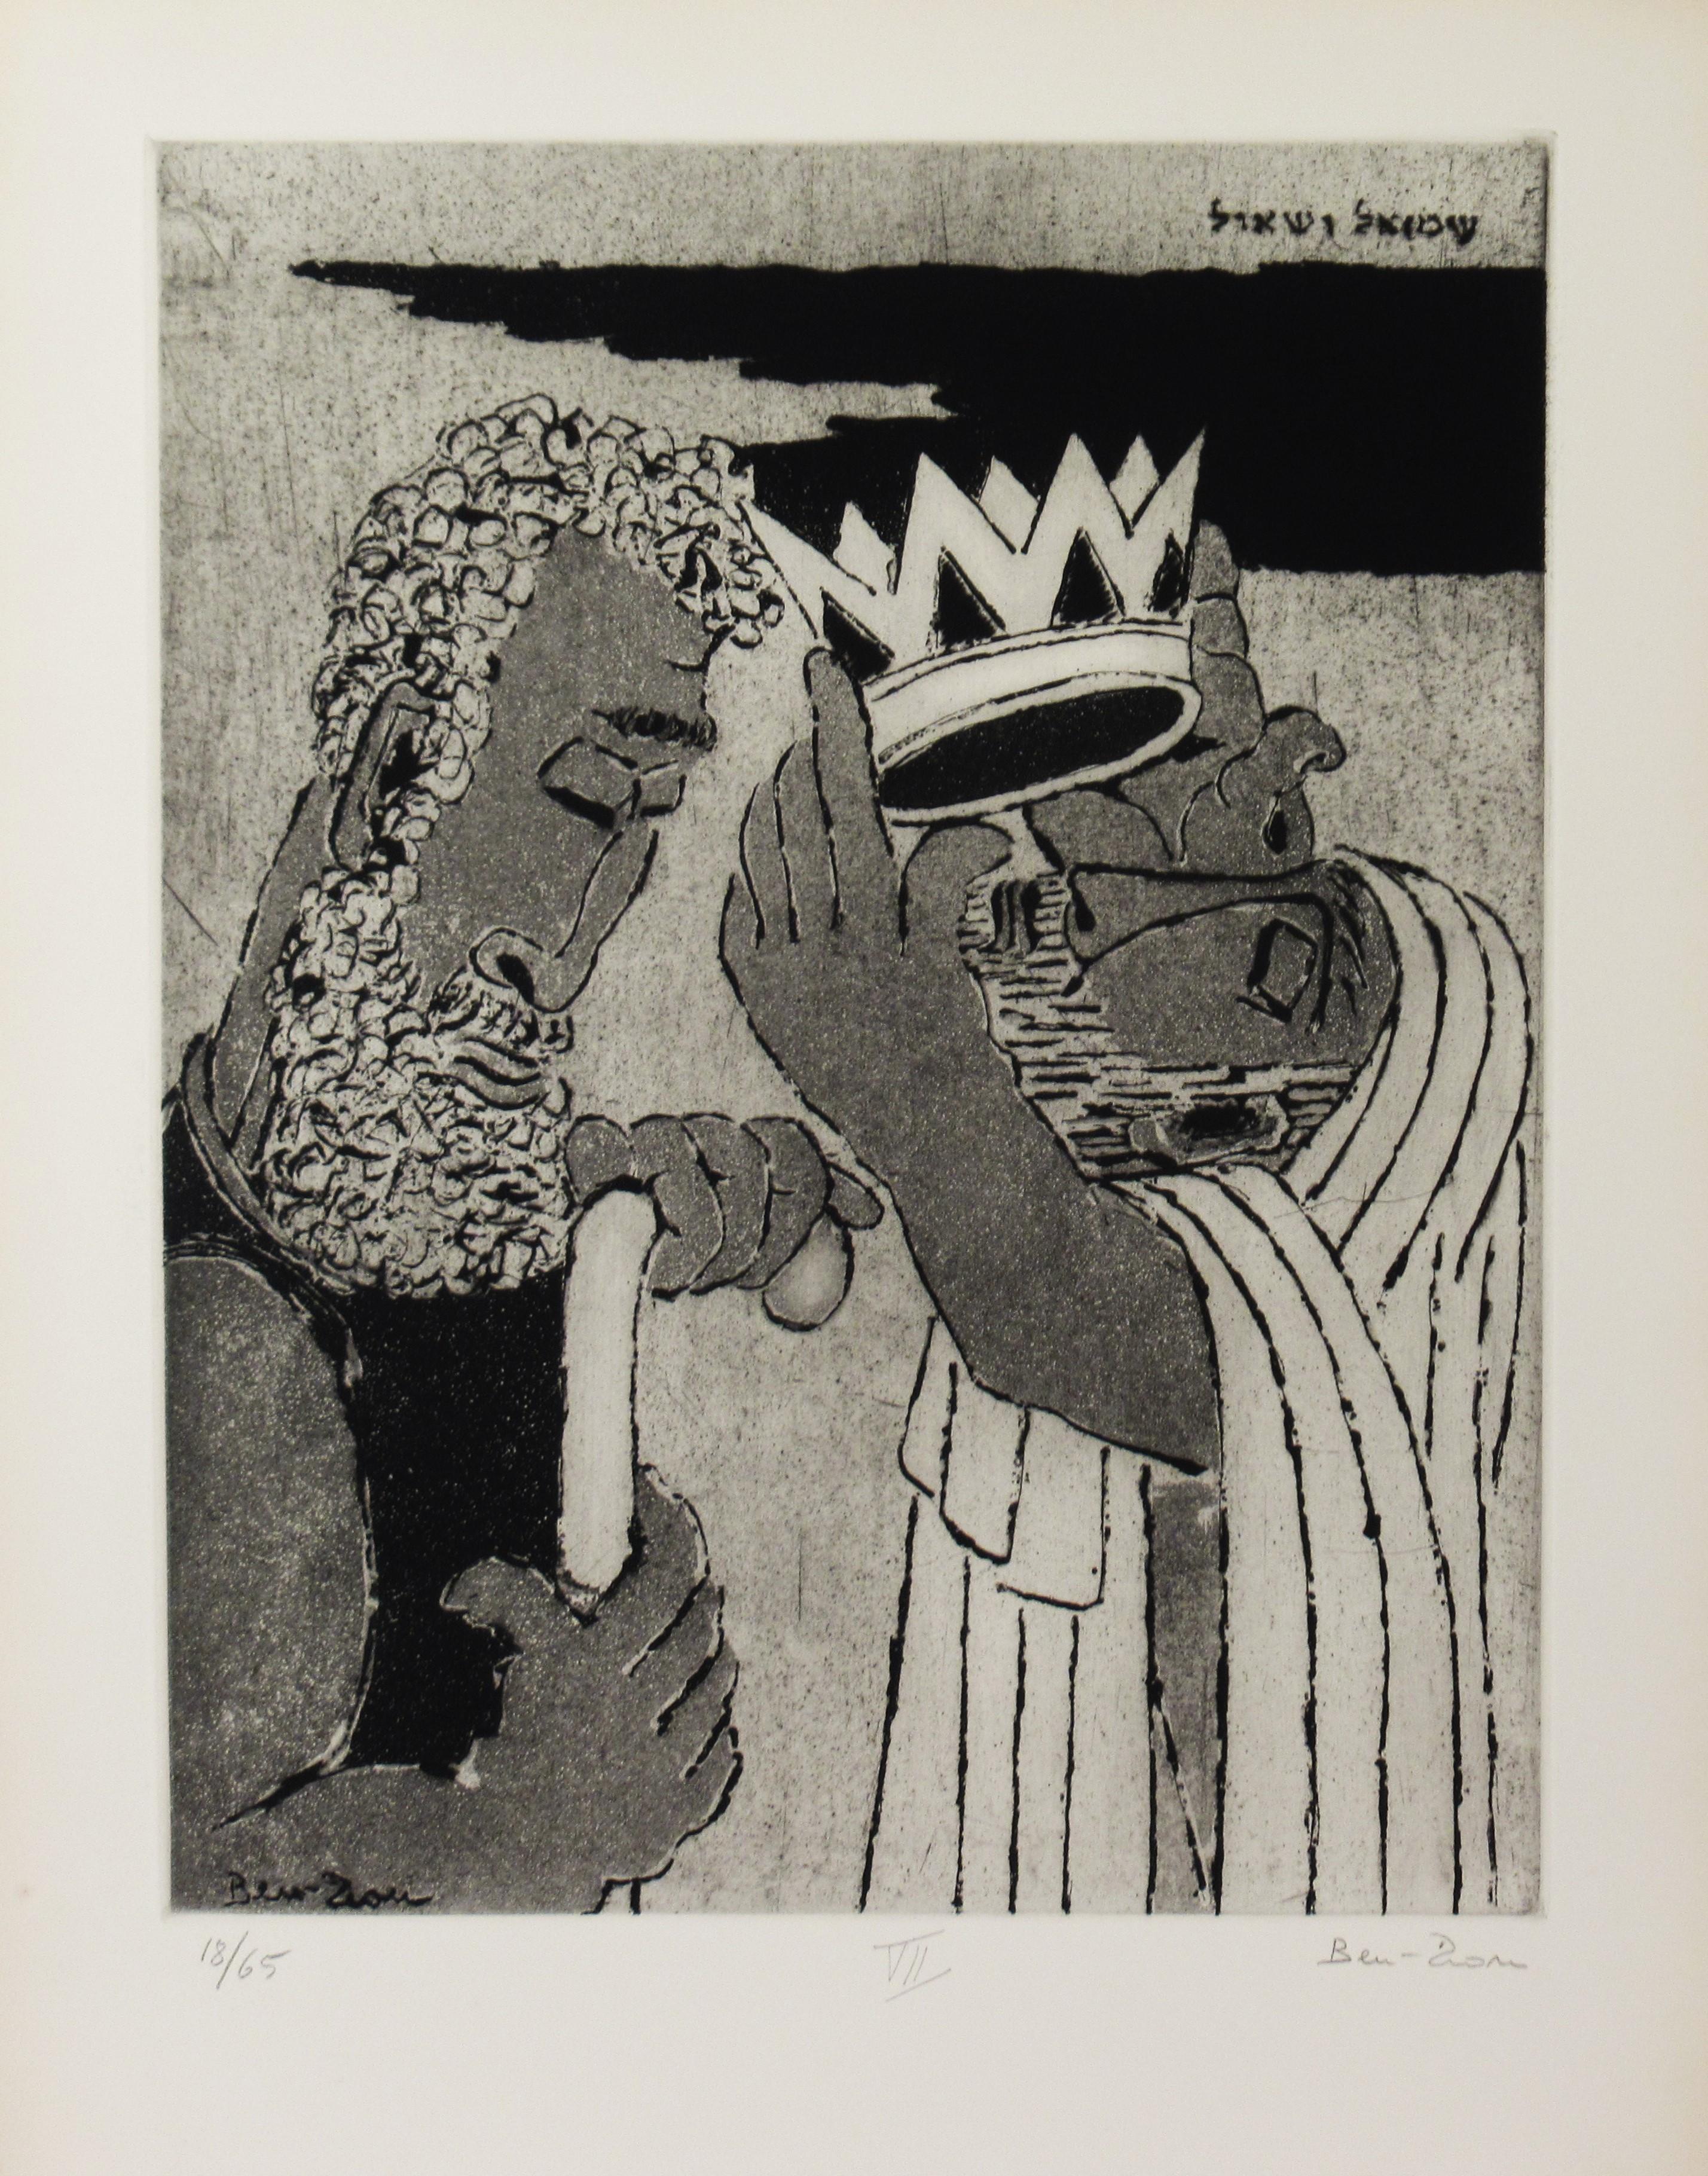 Ben Zion Weinman Figurative Print - "Then Said Samuel to the people" from the suite "Judges and Kings"